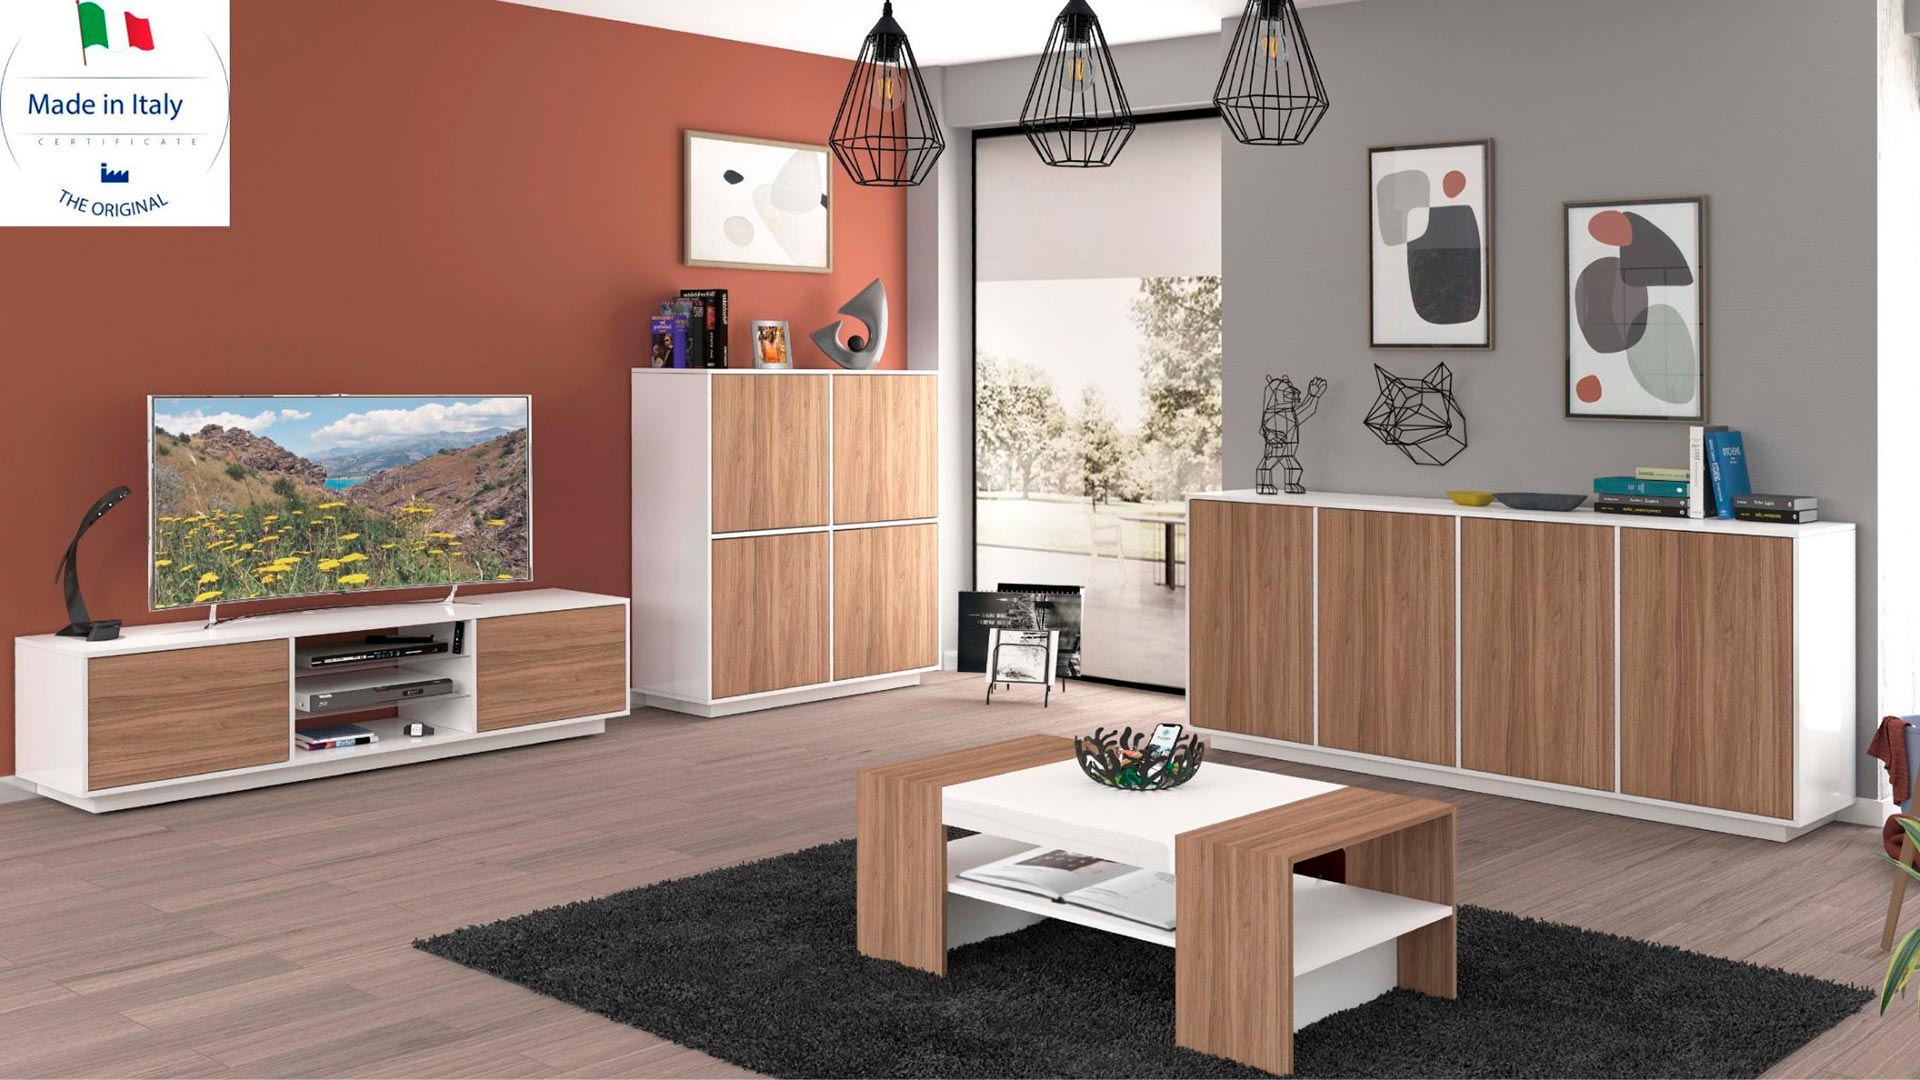 Furniture Made in Italy combining value, styles and trends - Web Furniture